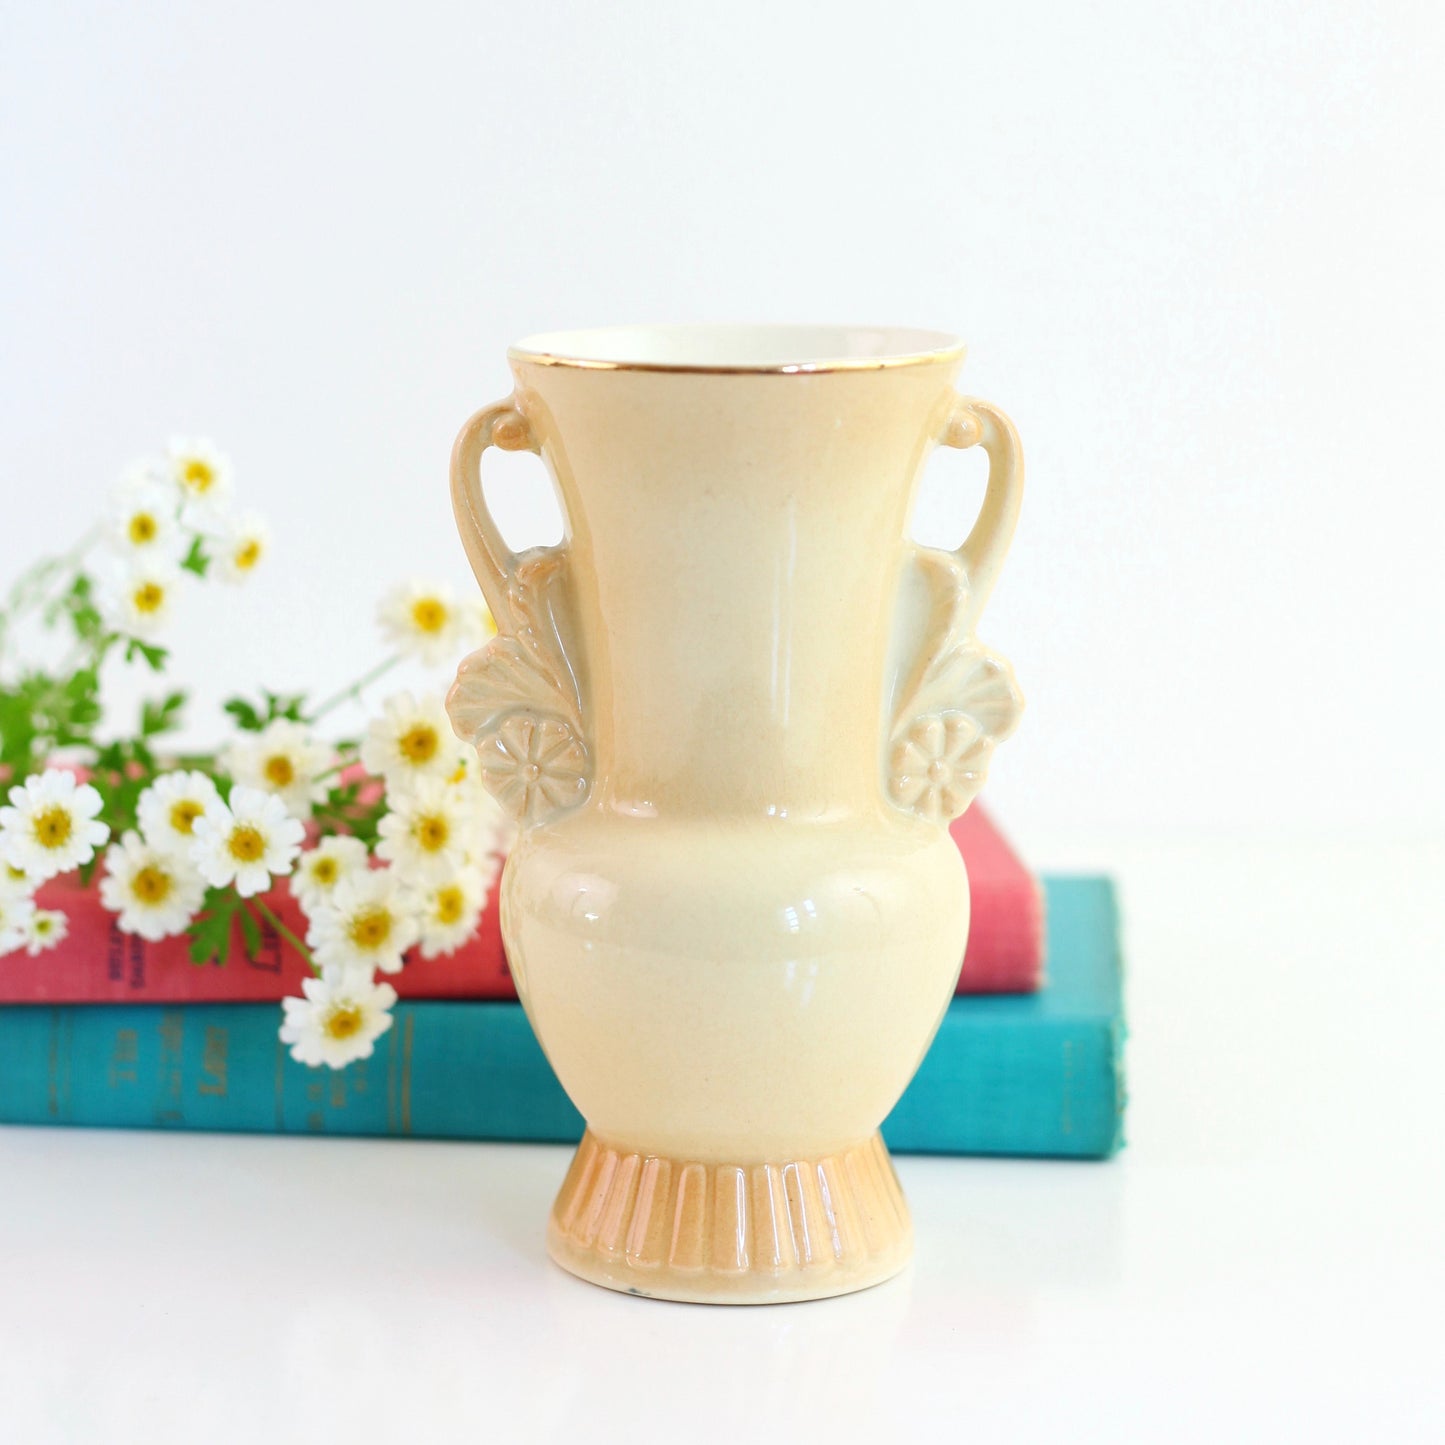 SOLD - Vintage Pastel Yellow Vase by Royal Copley